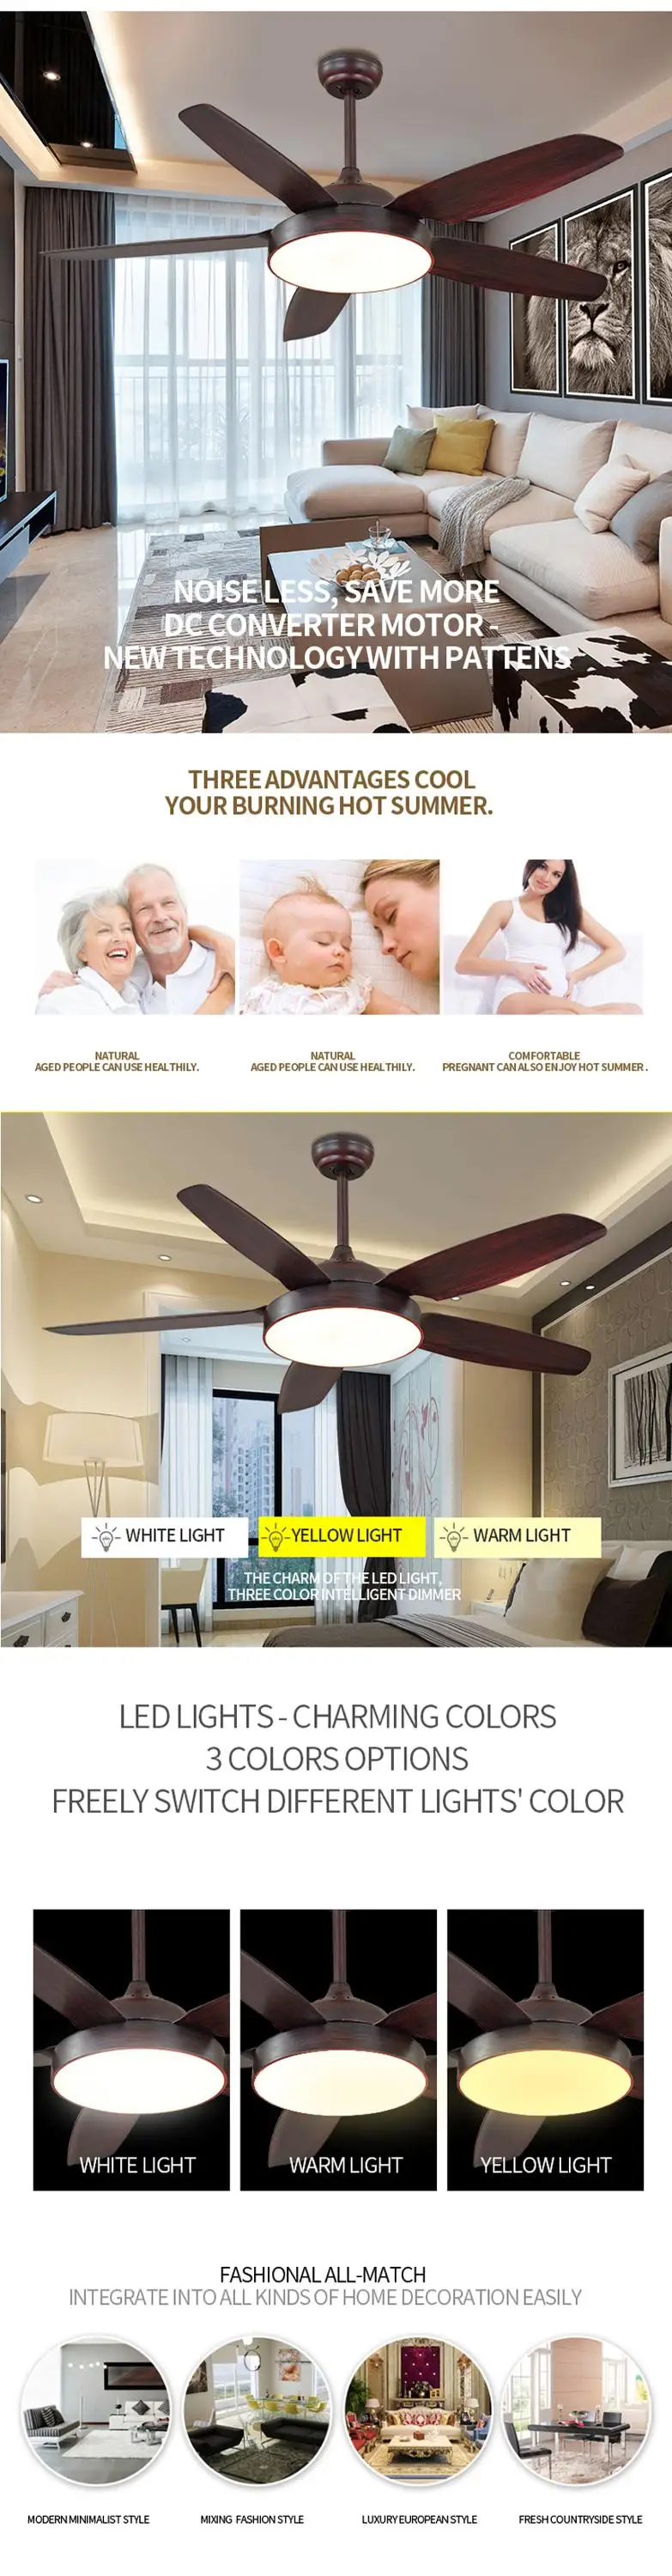 China manufacturer customized new technology large ceiling fans